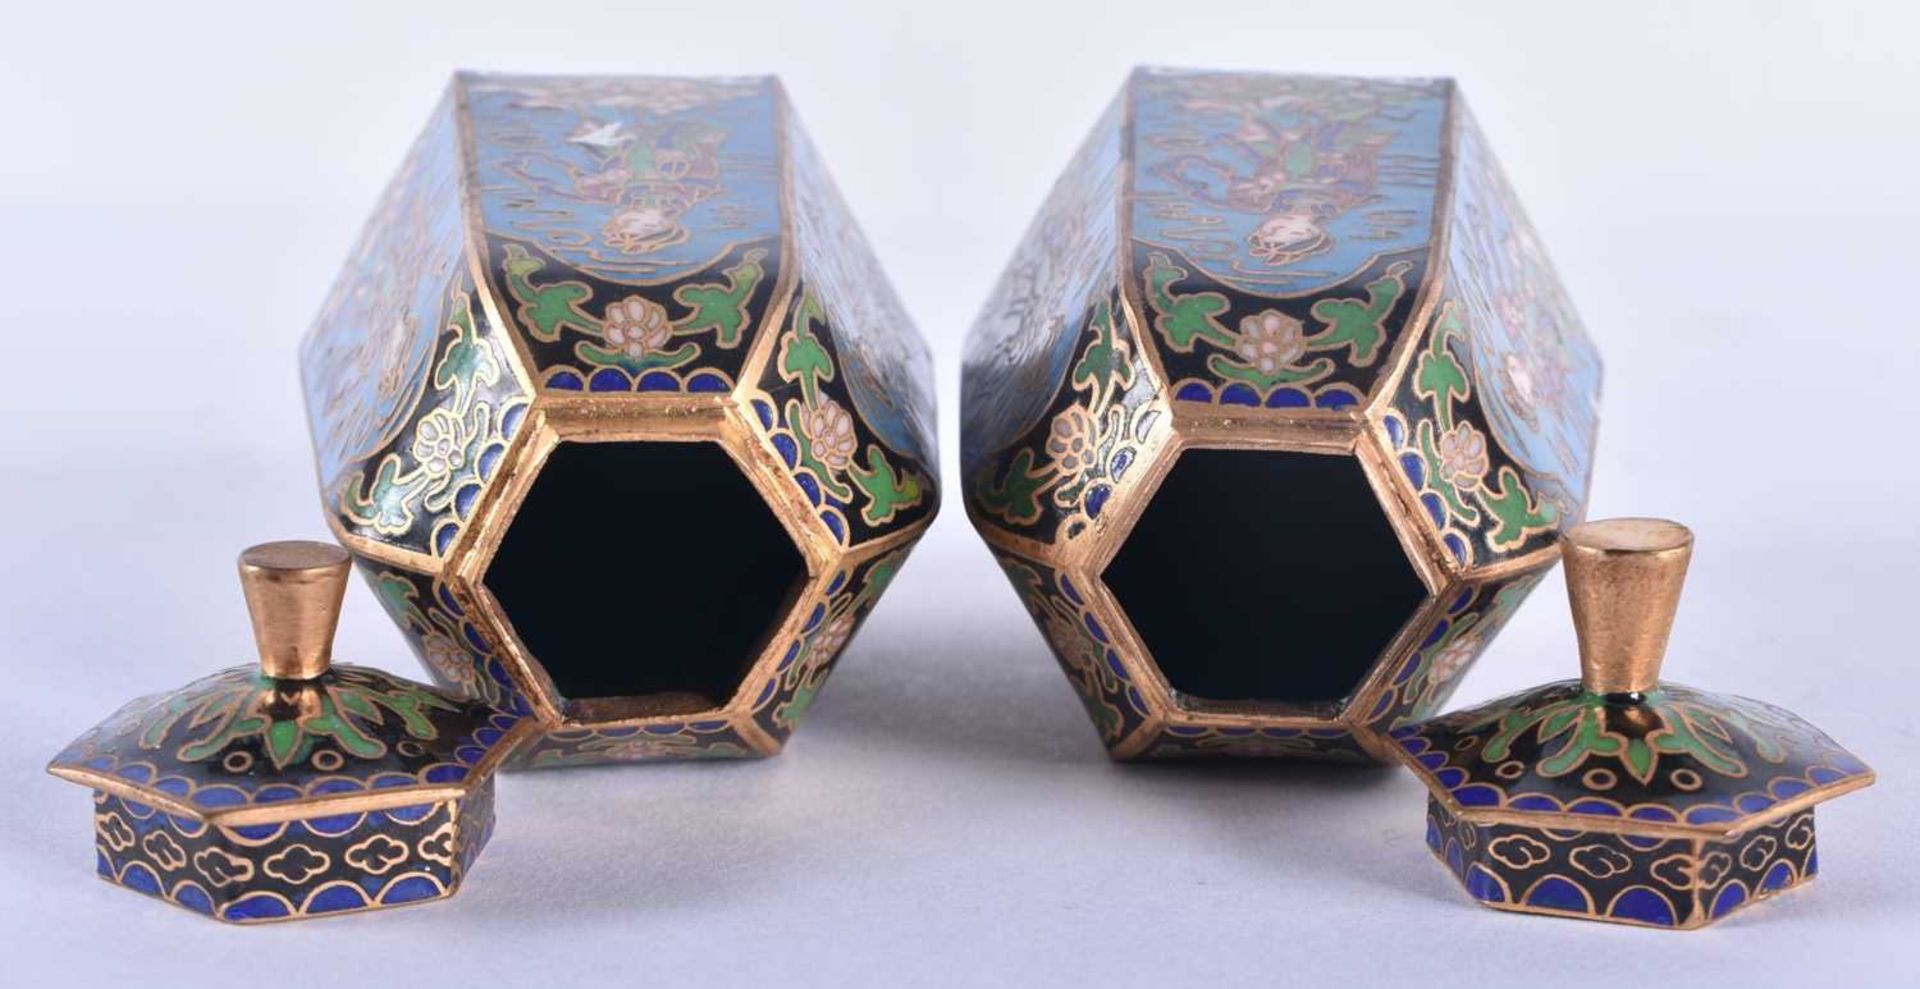 A PAIR OF CHINESE REPUBLICAN PERIOD CLOISONNE ENAMEL VASES AND COVERS. 9.5 cm high. - Image 3 of 4